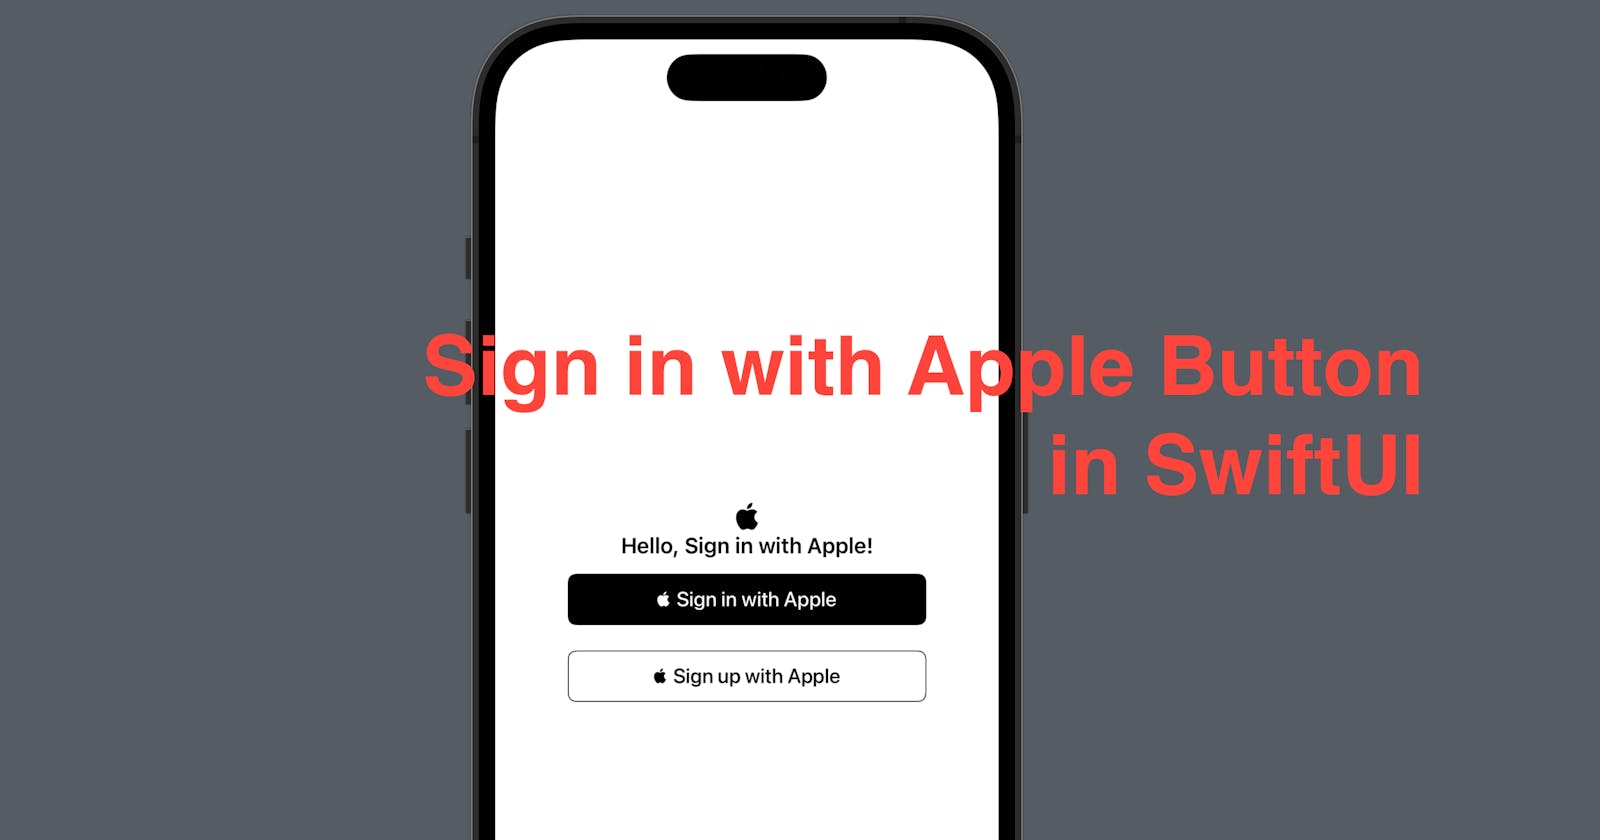 Add Sign in with Apple to your app